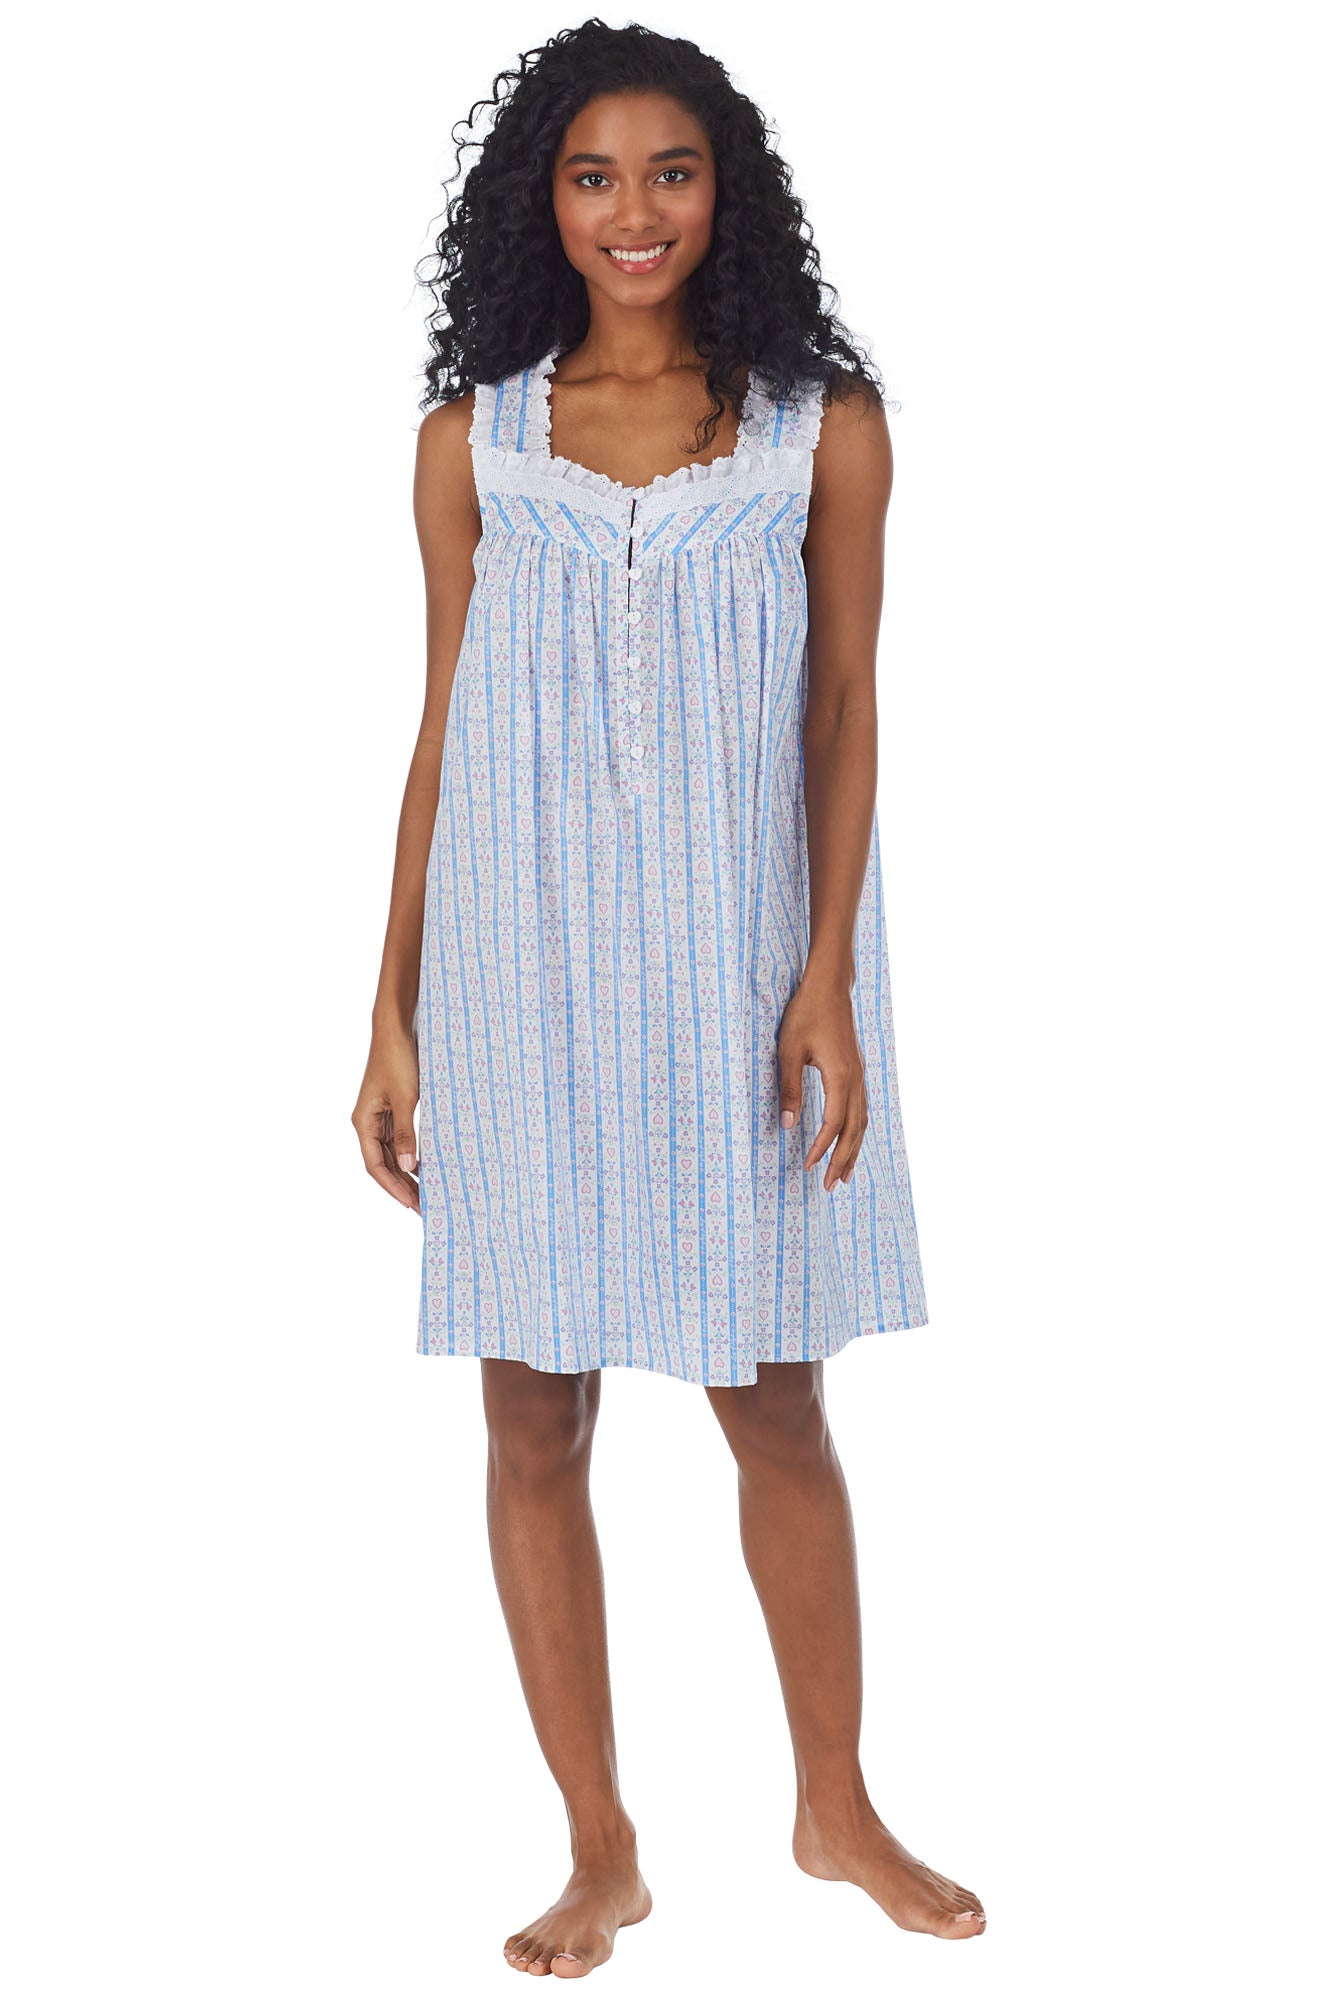 A lady wearing white short nightgown with blue pattern